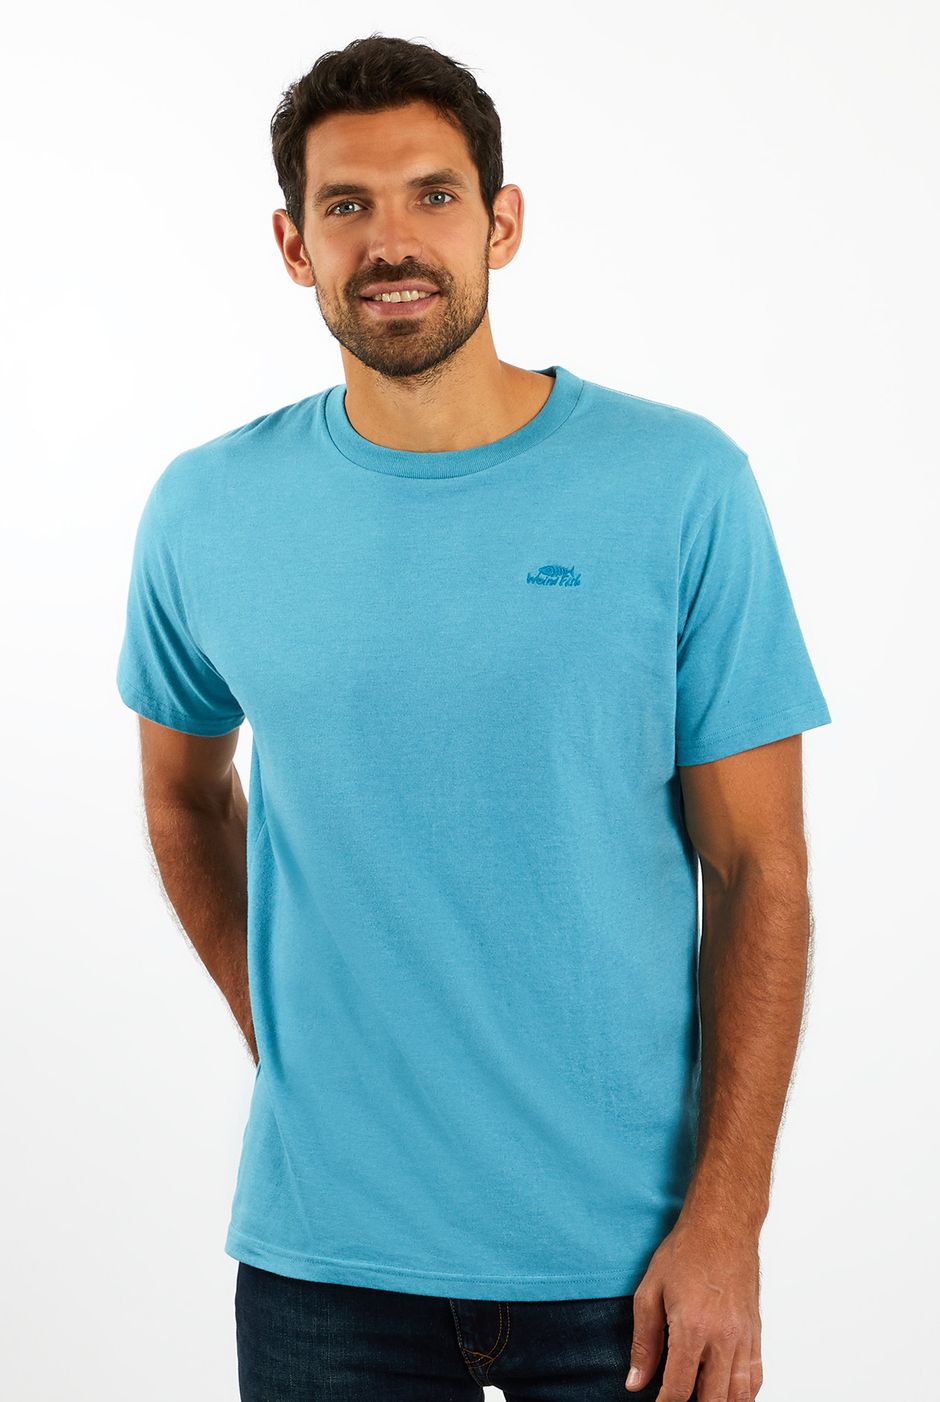 Fished T-Shirt Provincial Blue